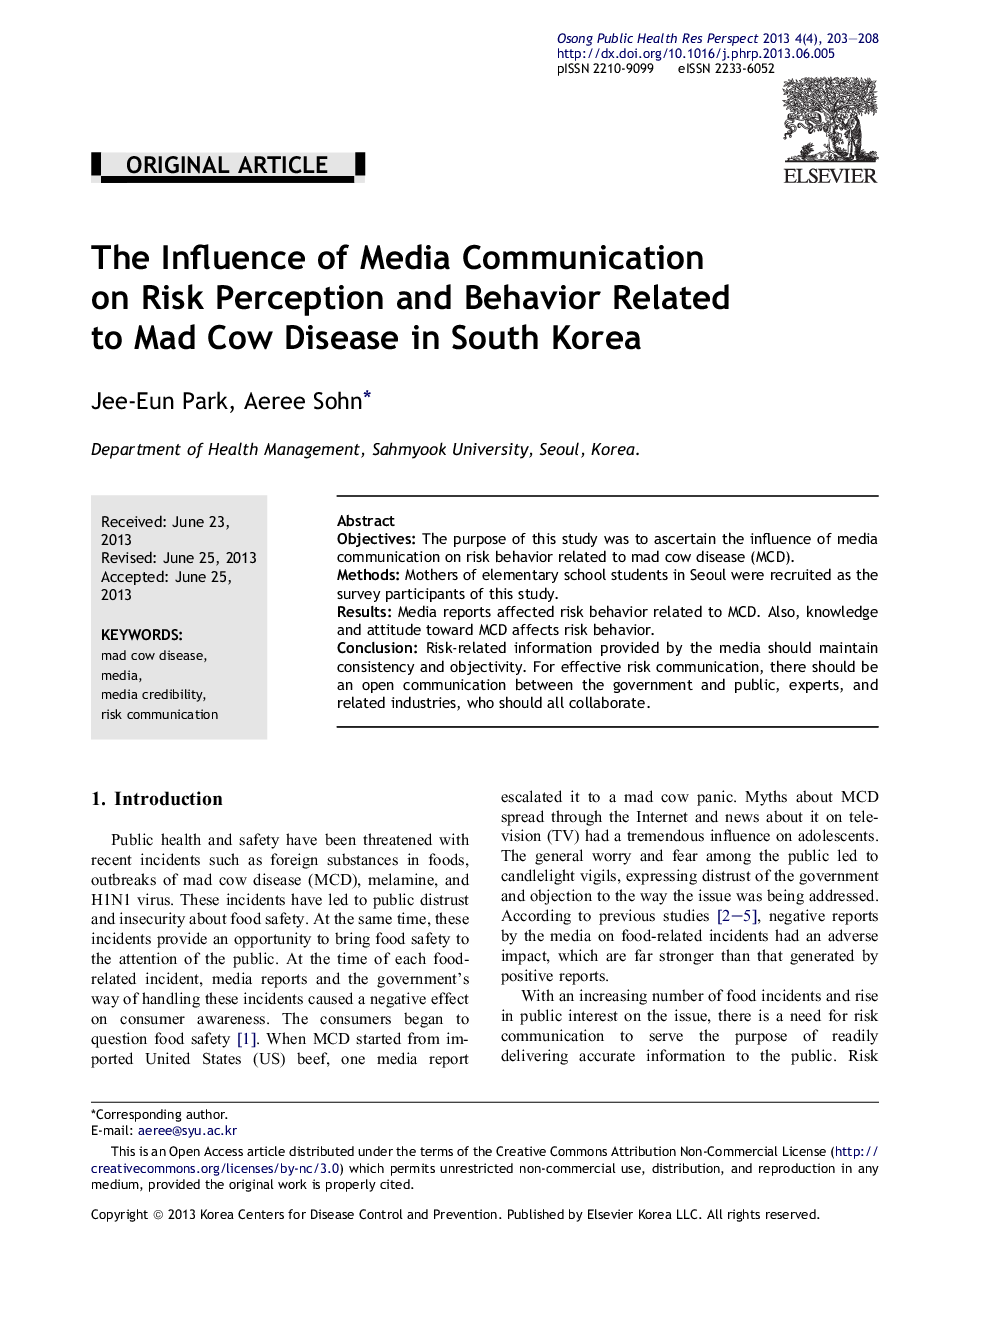 The Influence of Media Communication on Risk Perception and Behavior Related to Mad Cow Disease in South Korea 